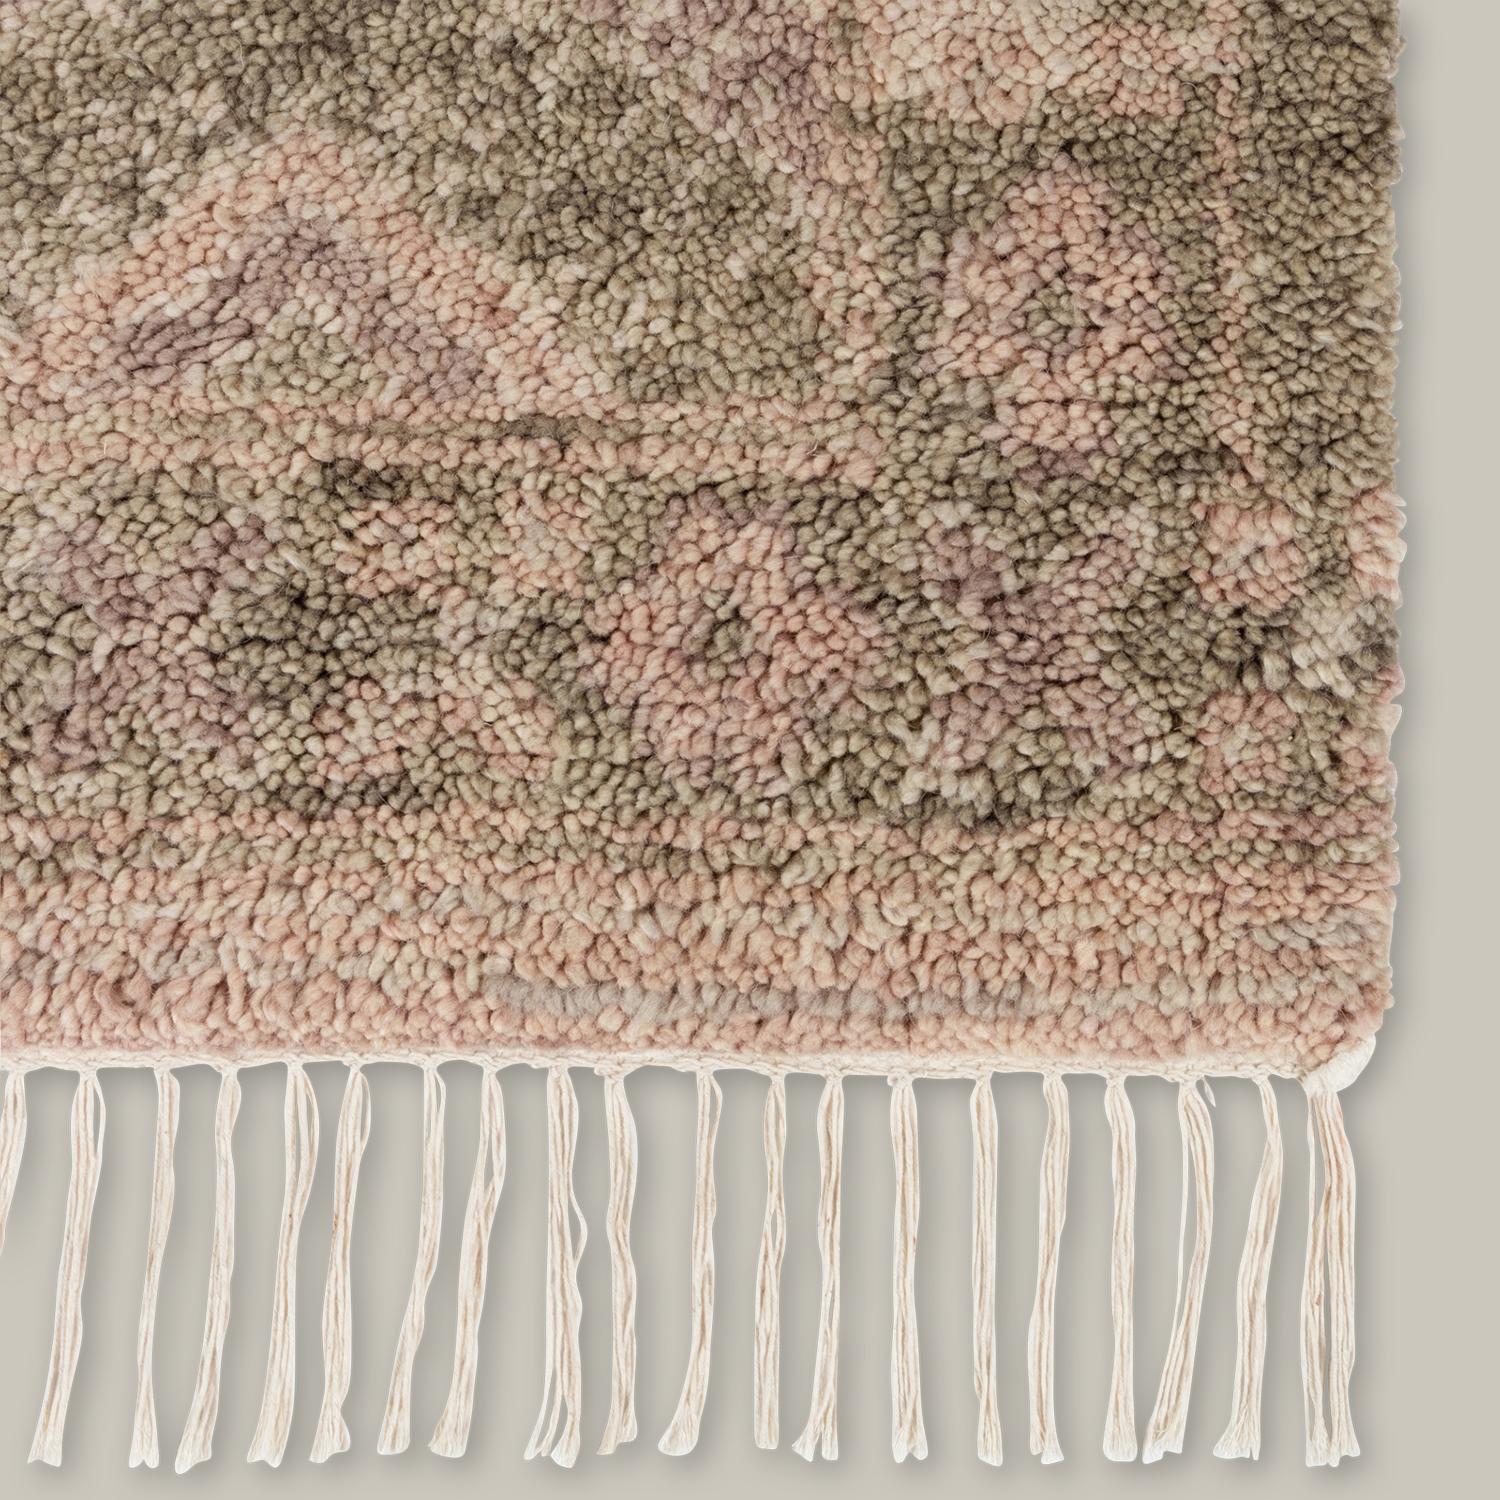 Traditional Moroccan rag rugs inspire the Doukkala Collection. Hand knotted out of wool, the pile is hand-shorn to create an irregularity in the look, forming a thick, almost cloud-like texture underfoot. The loosest interpretations of a Moroccan